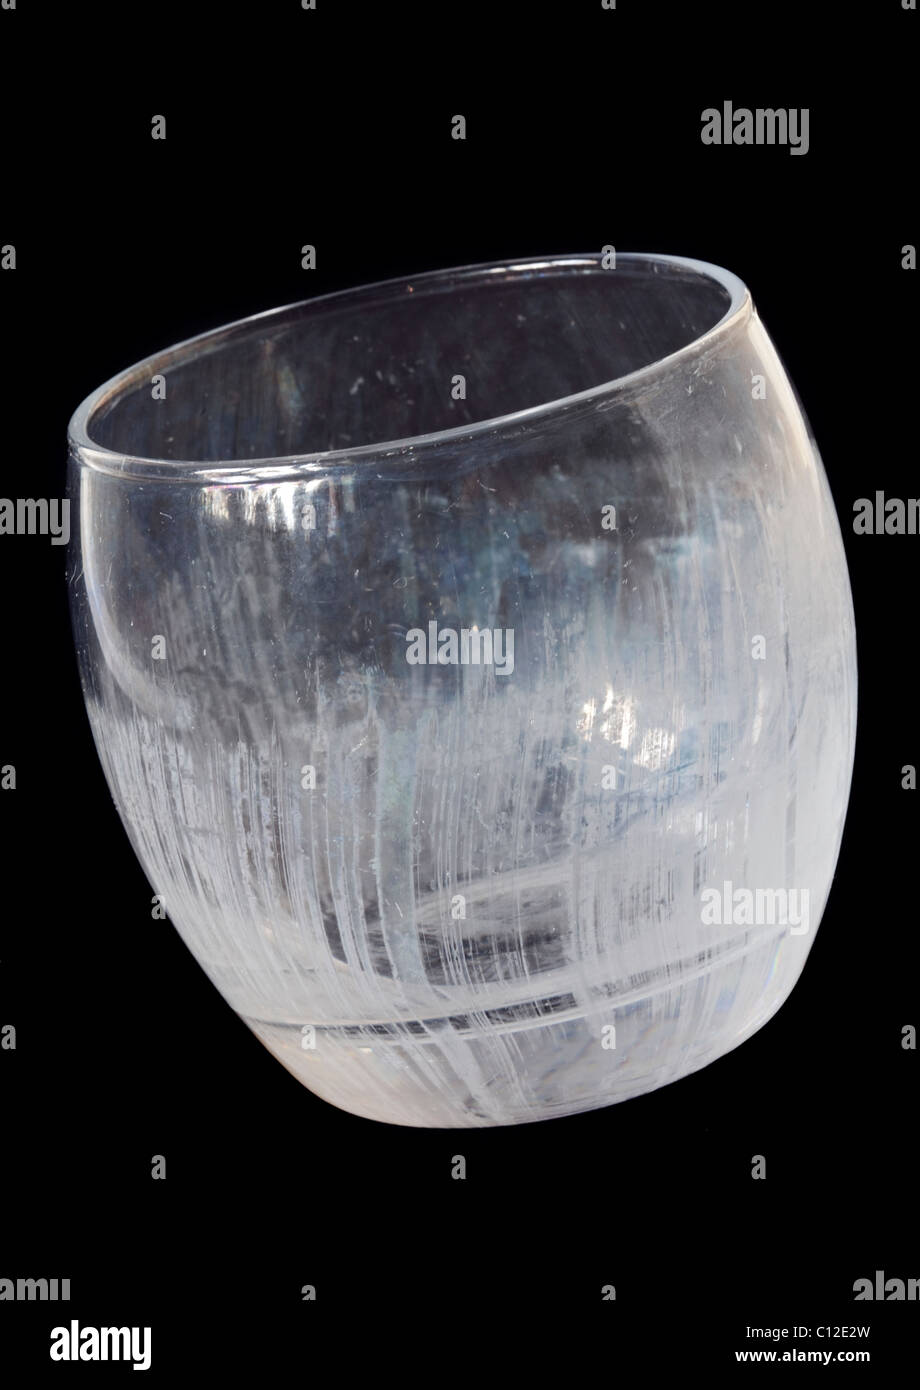 Glass Tumbler showing limescale/etching from frequent dishwashing Stock Photo